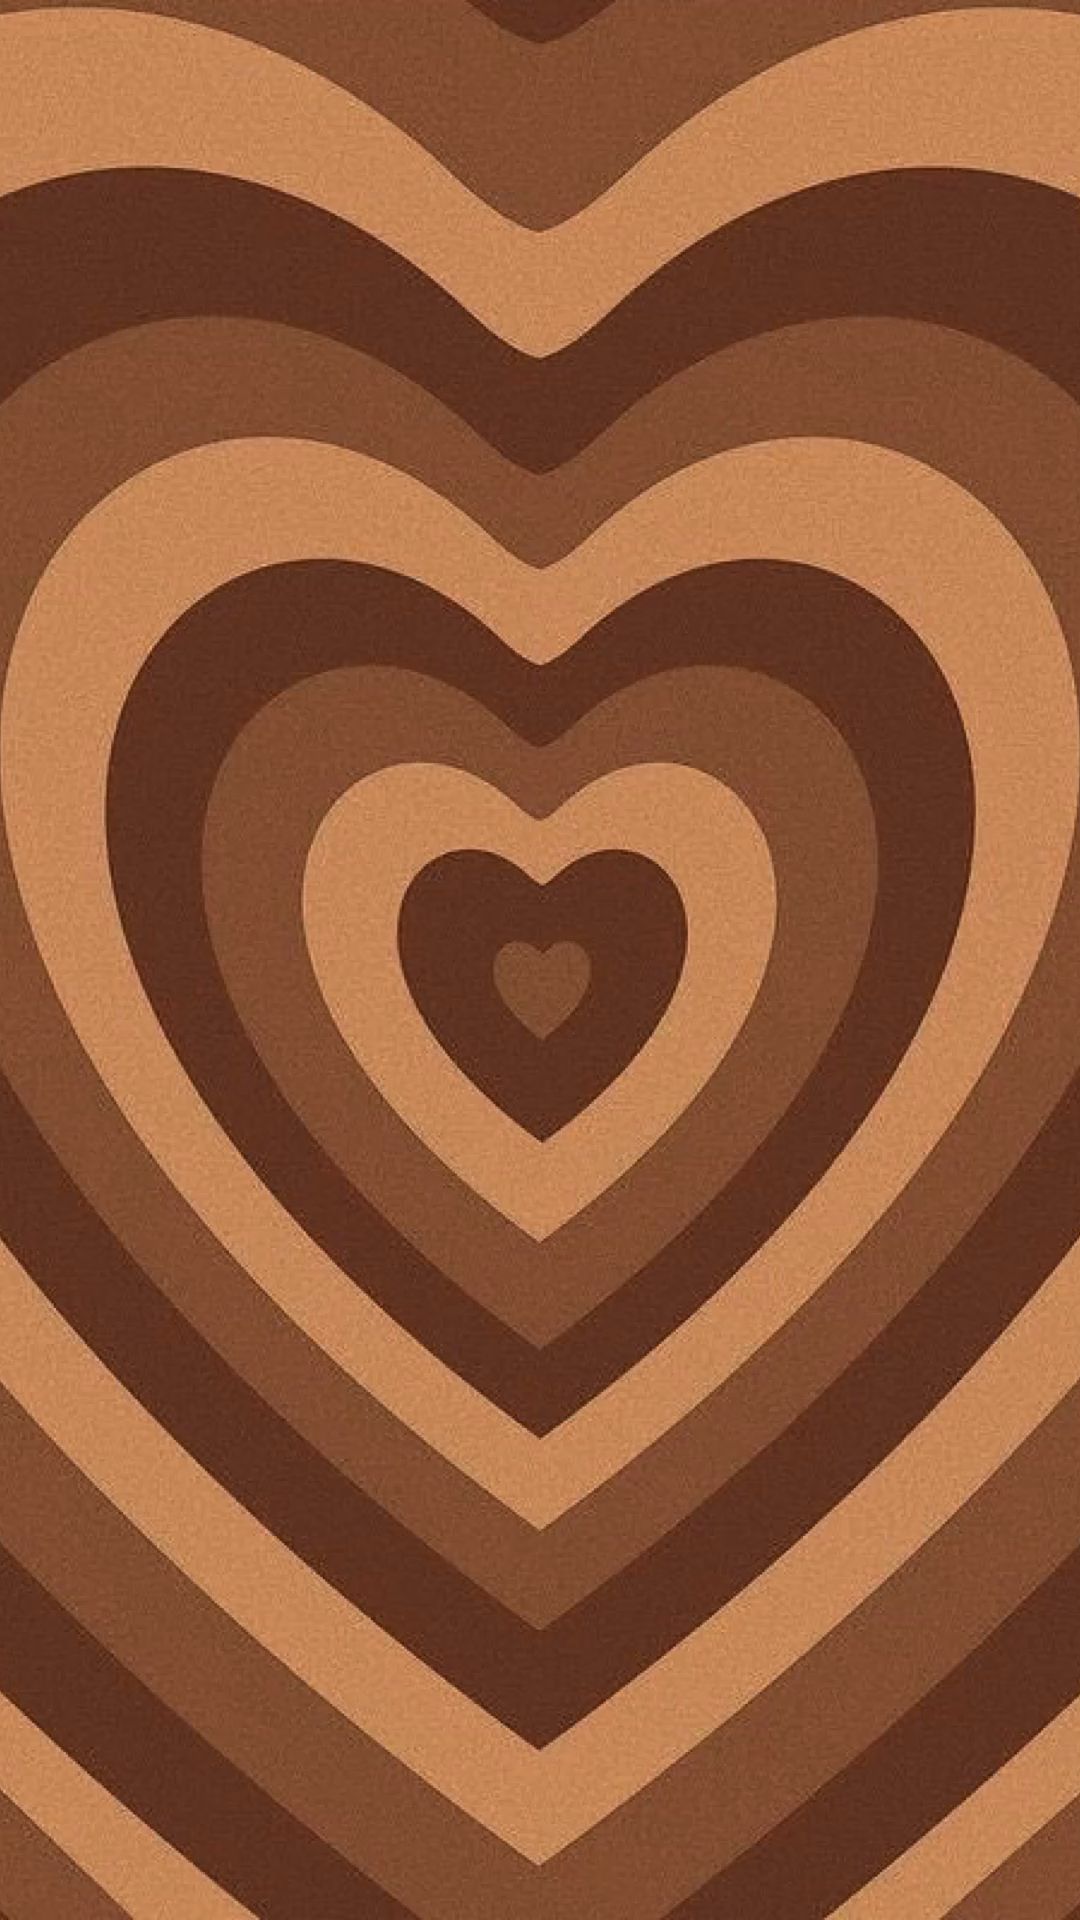 Background Brown Aesthetic Wallpaper